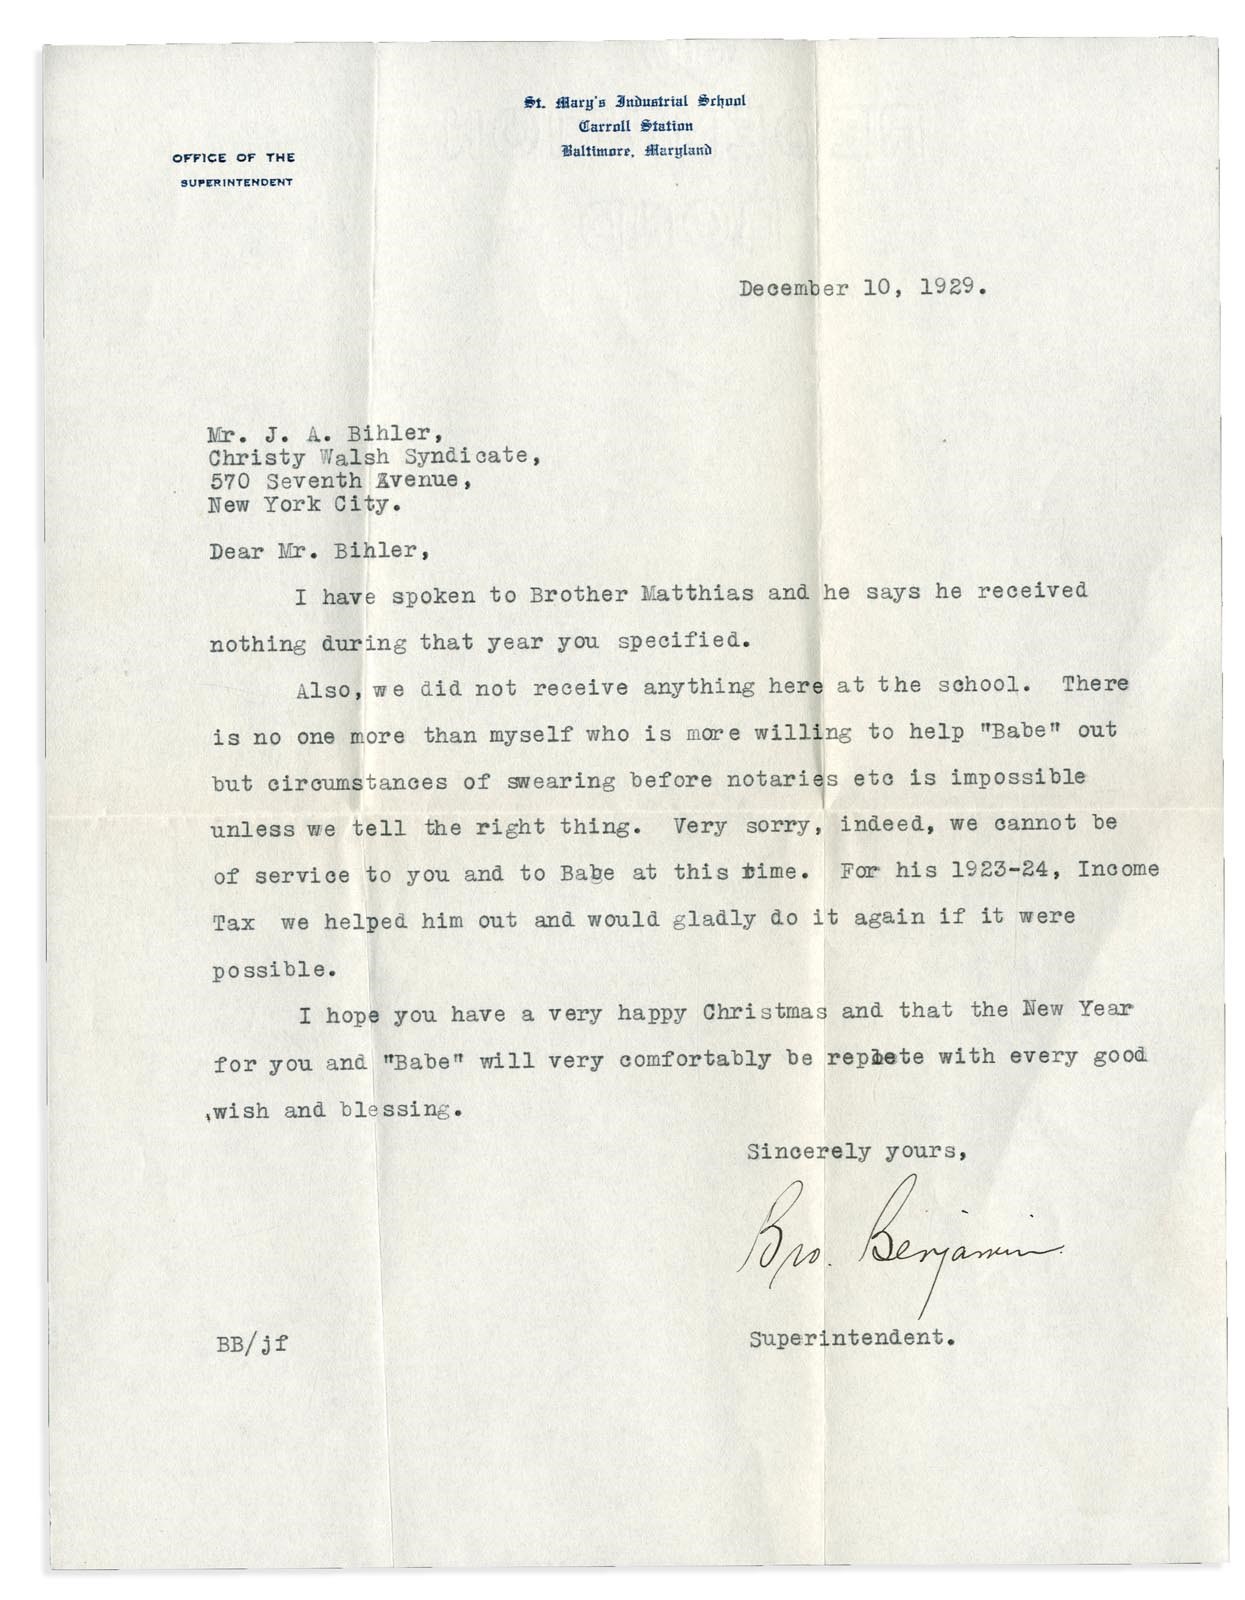 Collection Of Babe Ruth's Right Hand Man - Important 1929 St. Mary's Industrial School Letter r.e. Brother Matthias Won't Lie To Save Babe Ruth From Tax Troubles